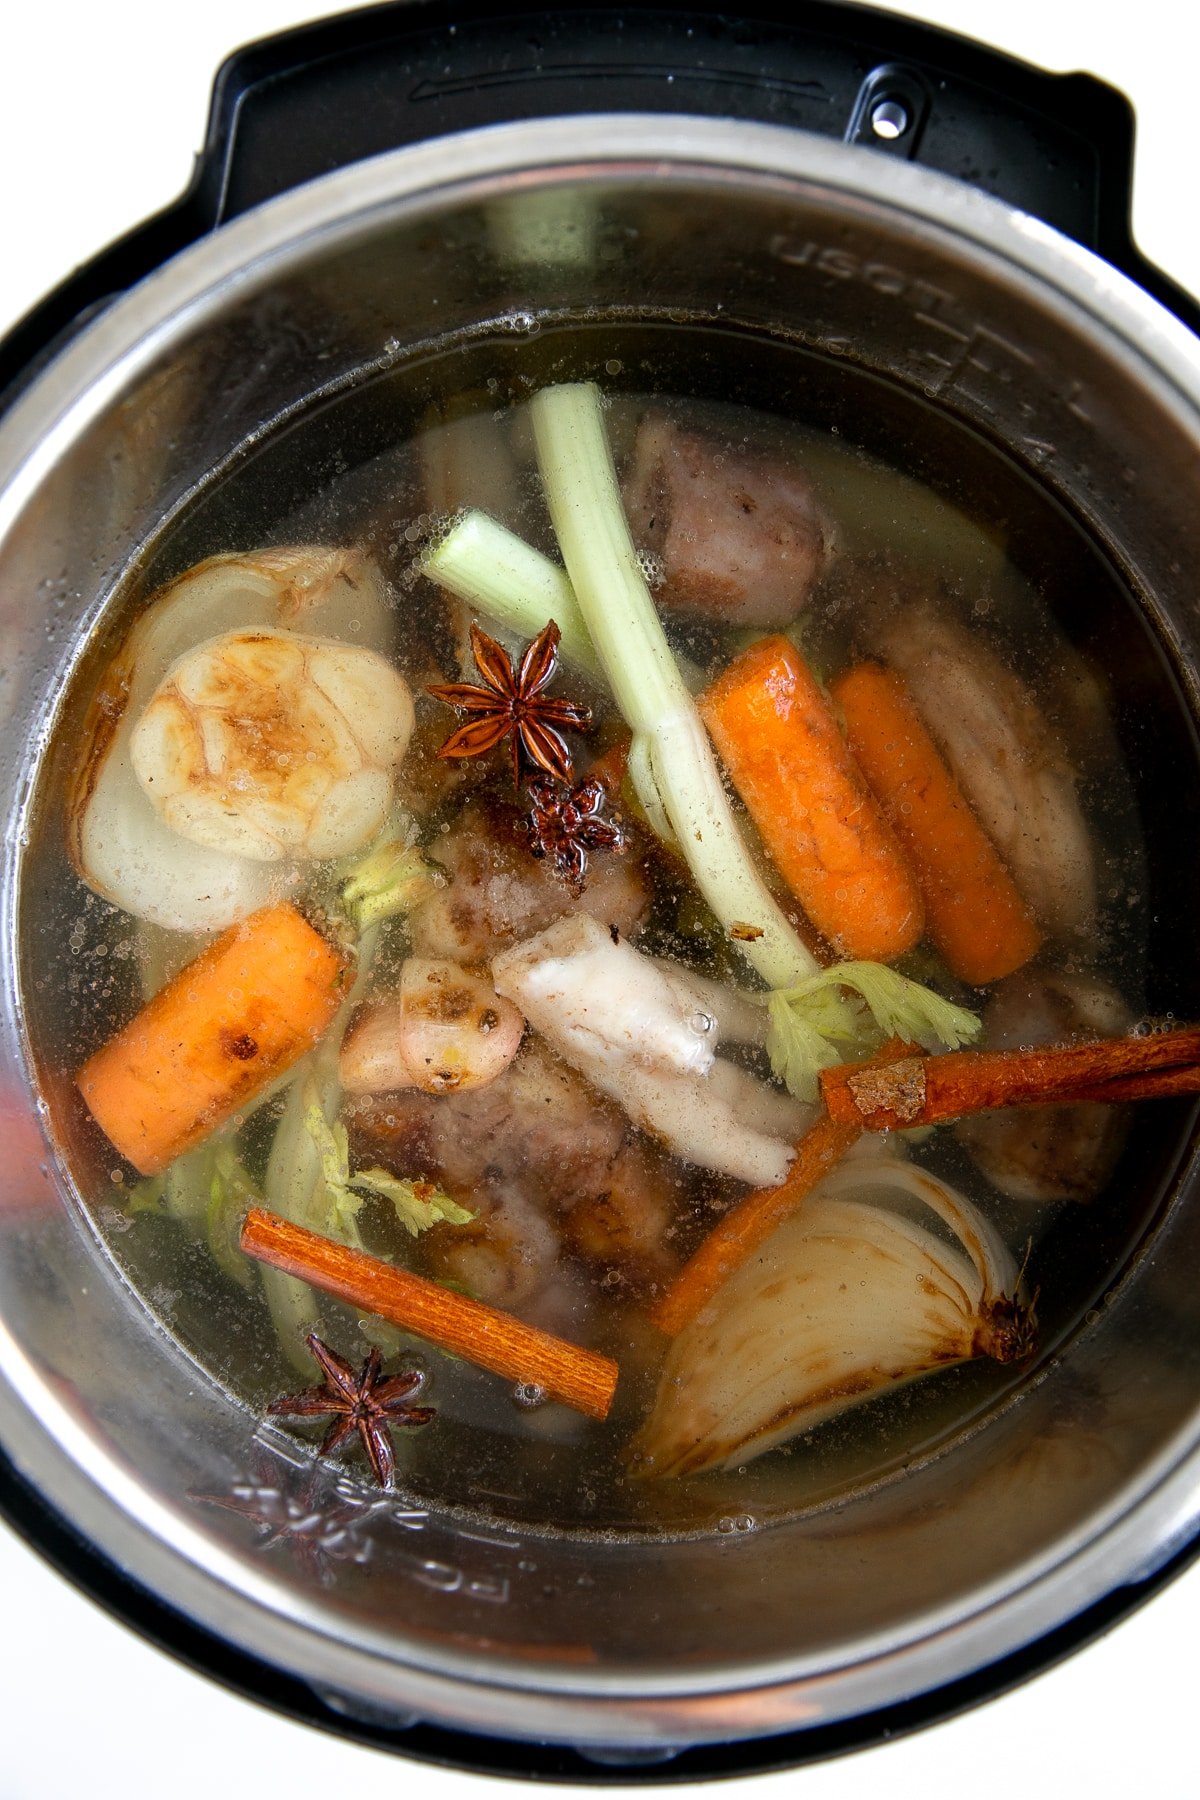 Instant Pot filled with beef bones, chicken feet, garlic, charred vegetables, star anise, cinnamon sticks, and filled three-fourths of the way full with water.